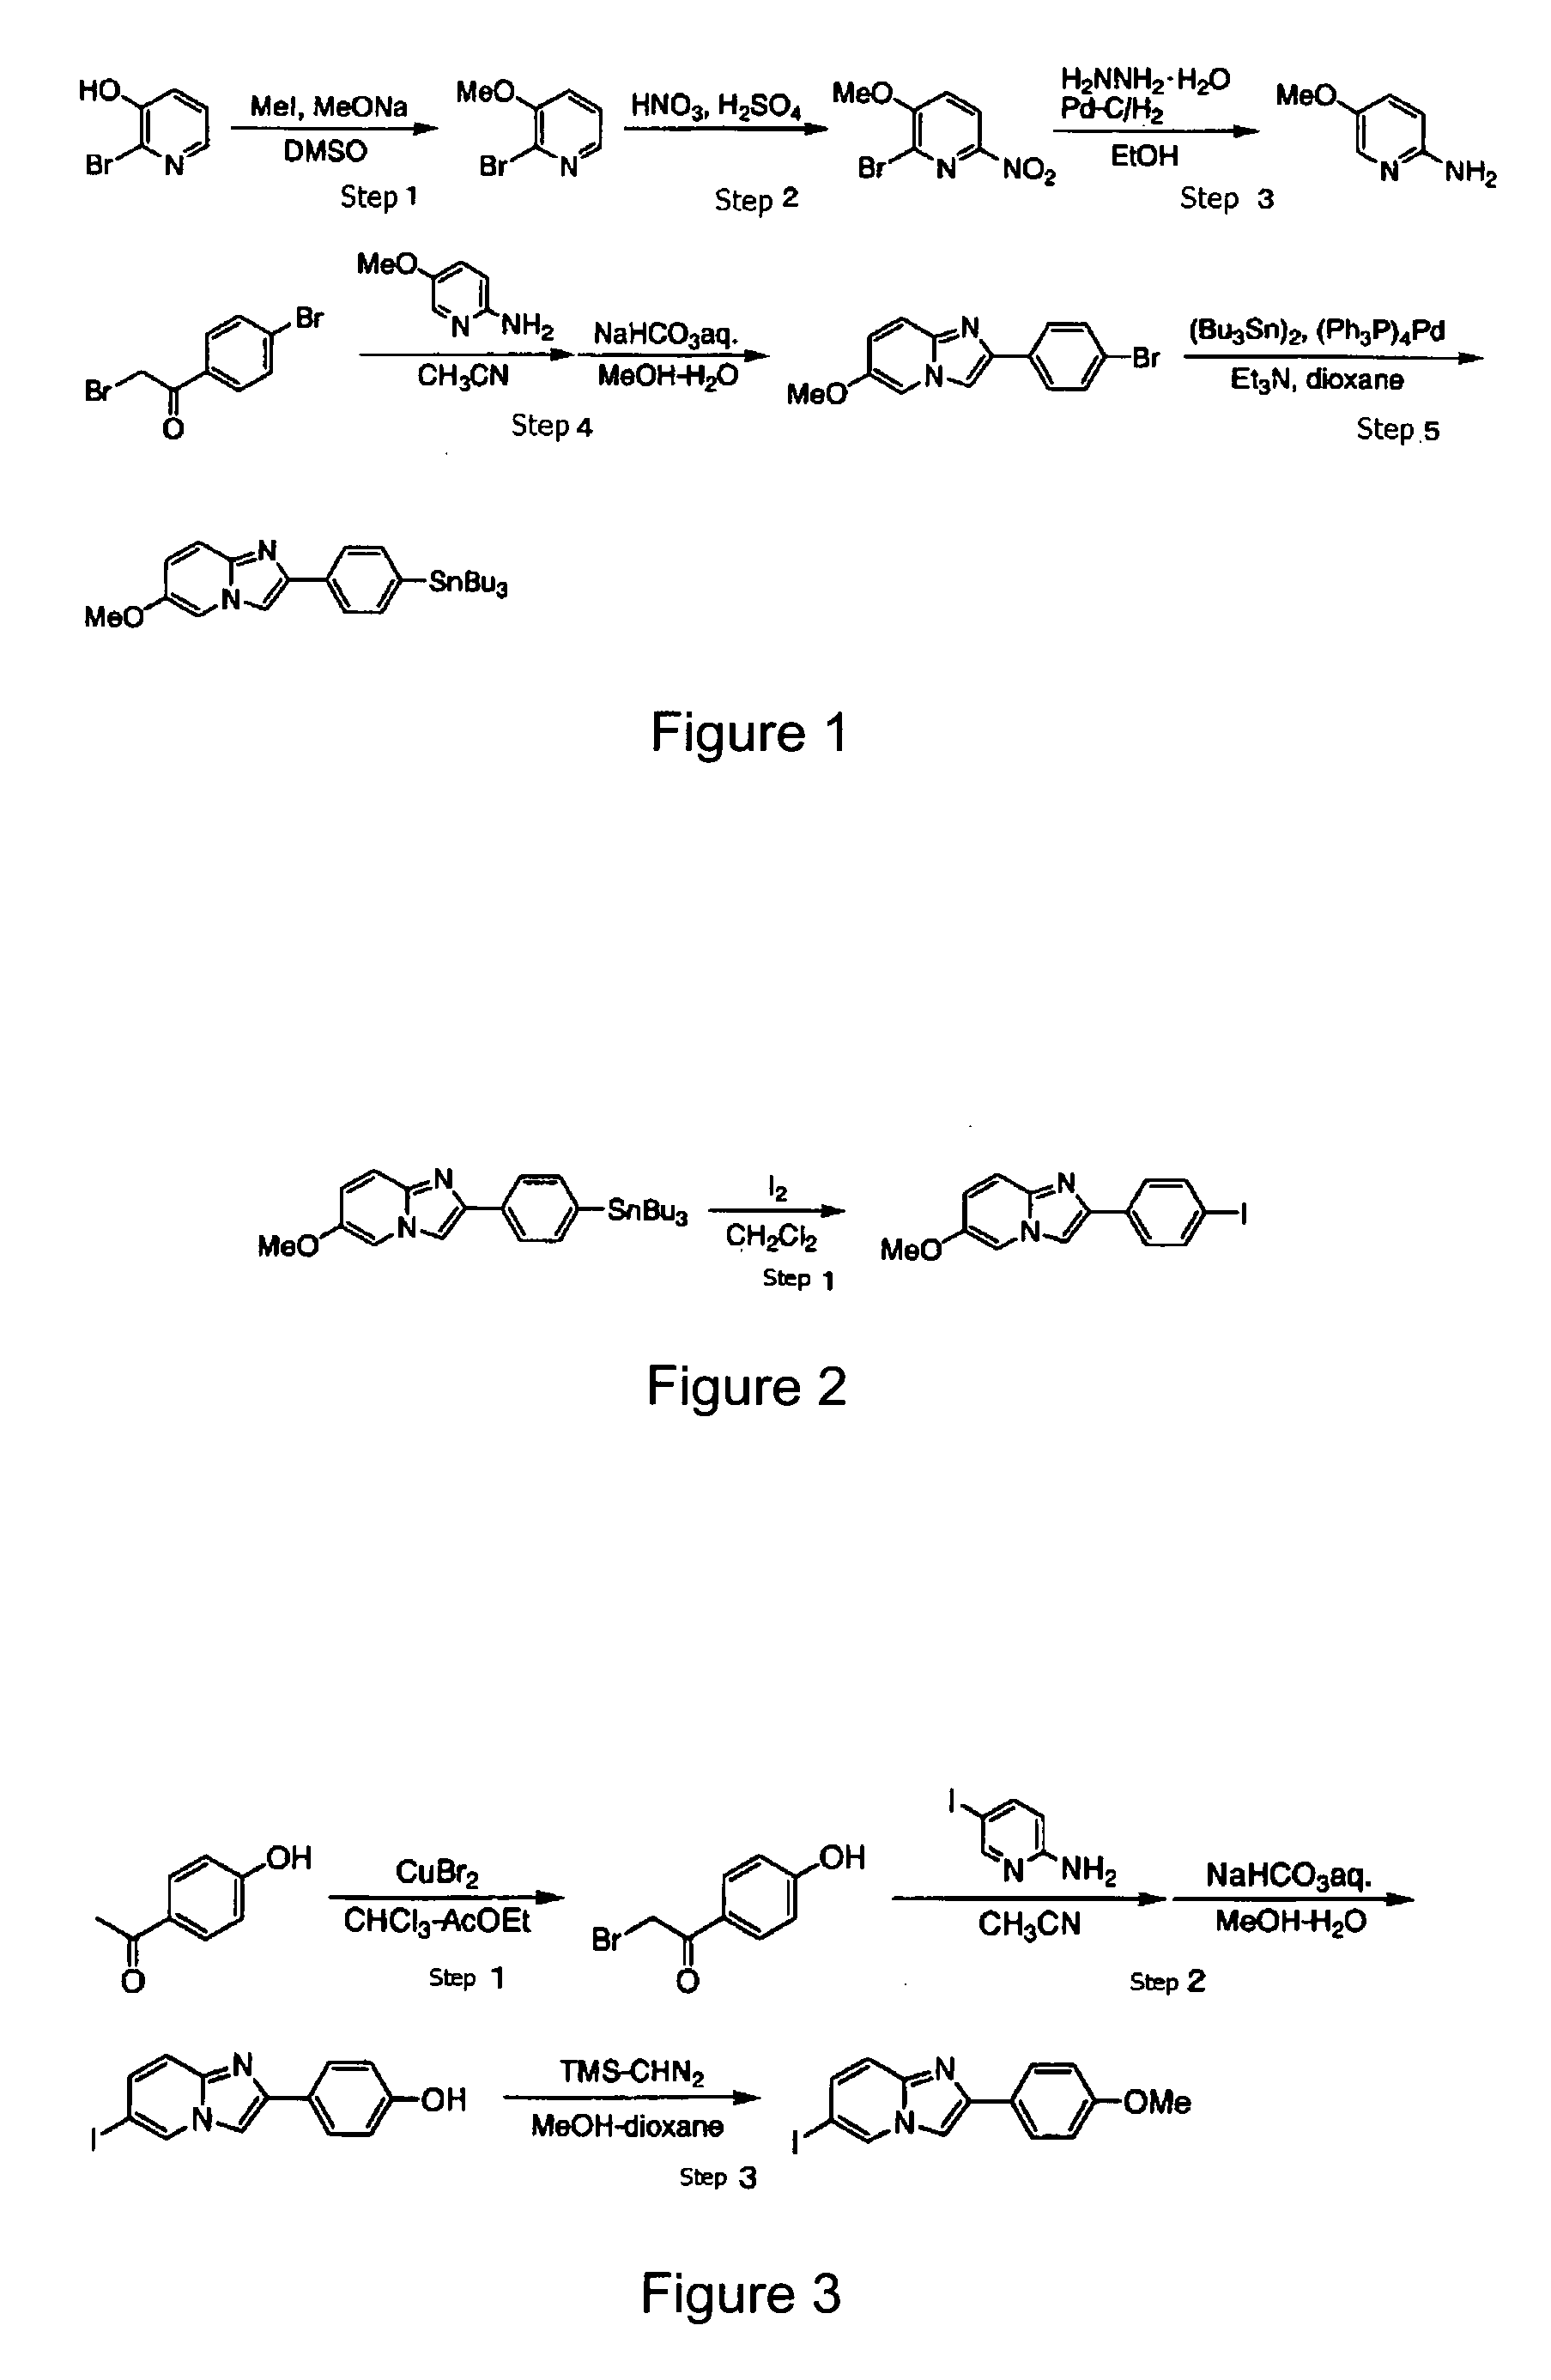 Novel compound with affinity for amyloid